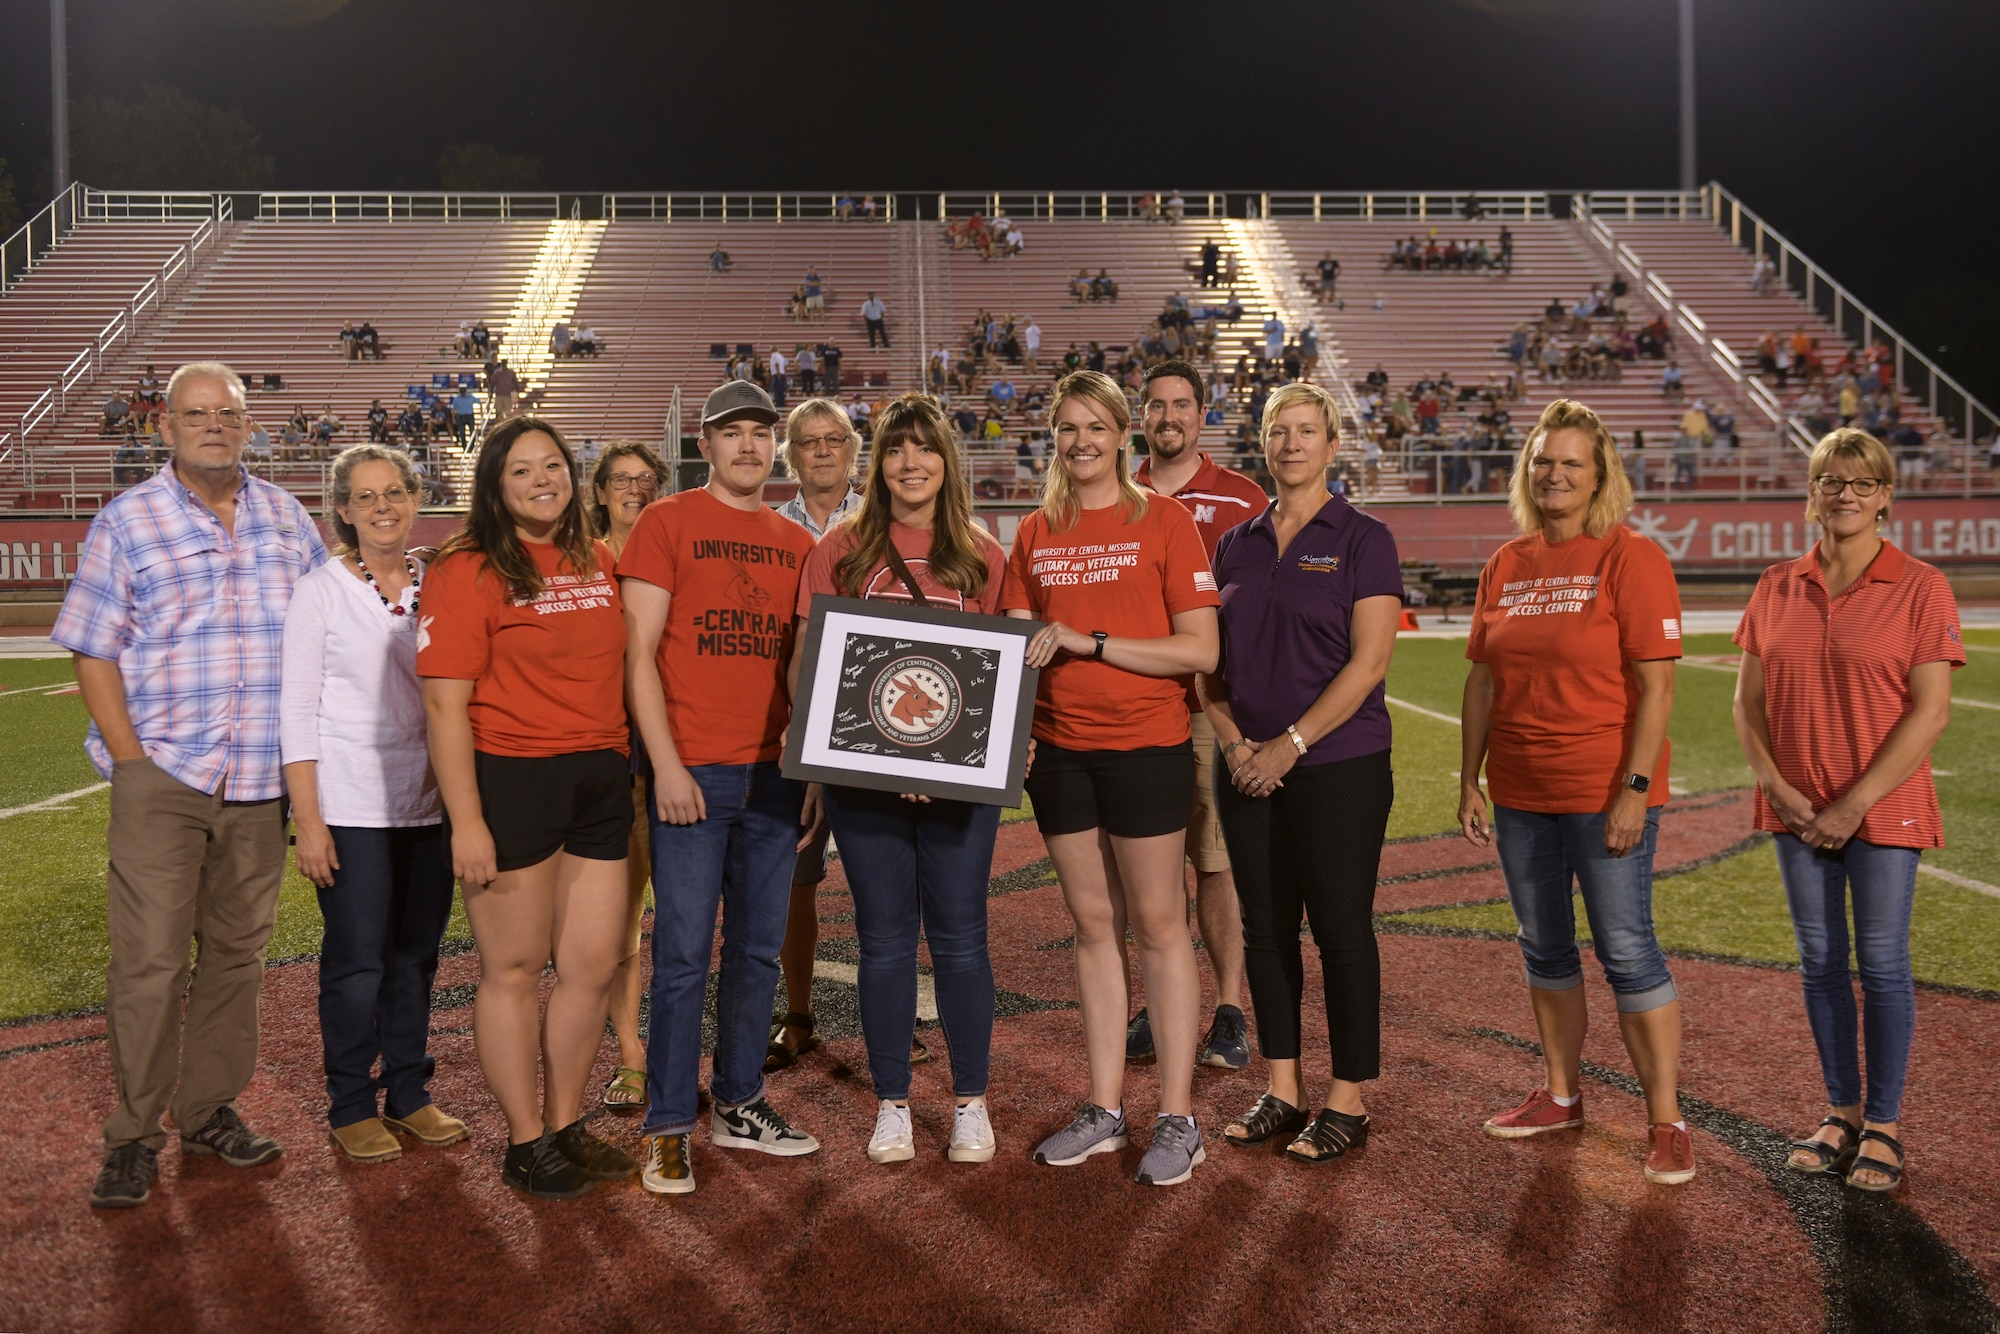 U.S. Air Force Staff Sgt. Natalie Rhinehart, 442nd Logistics Readiness Squadron unit training manager, is recognized by the University of Central Missouri Military and Veterans Success Center during halftime of the UCM Military Appreciation football game, Sept. 8, 2022, in Warrensburg, Missouri. Whiteman AFB and UCM share a valuable community partnership that fosters a supportive relationship between the base and local communities. (U.S. Air Force photo by Tech. Sgt. Dylan Nuckolls)